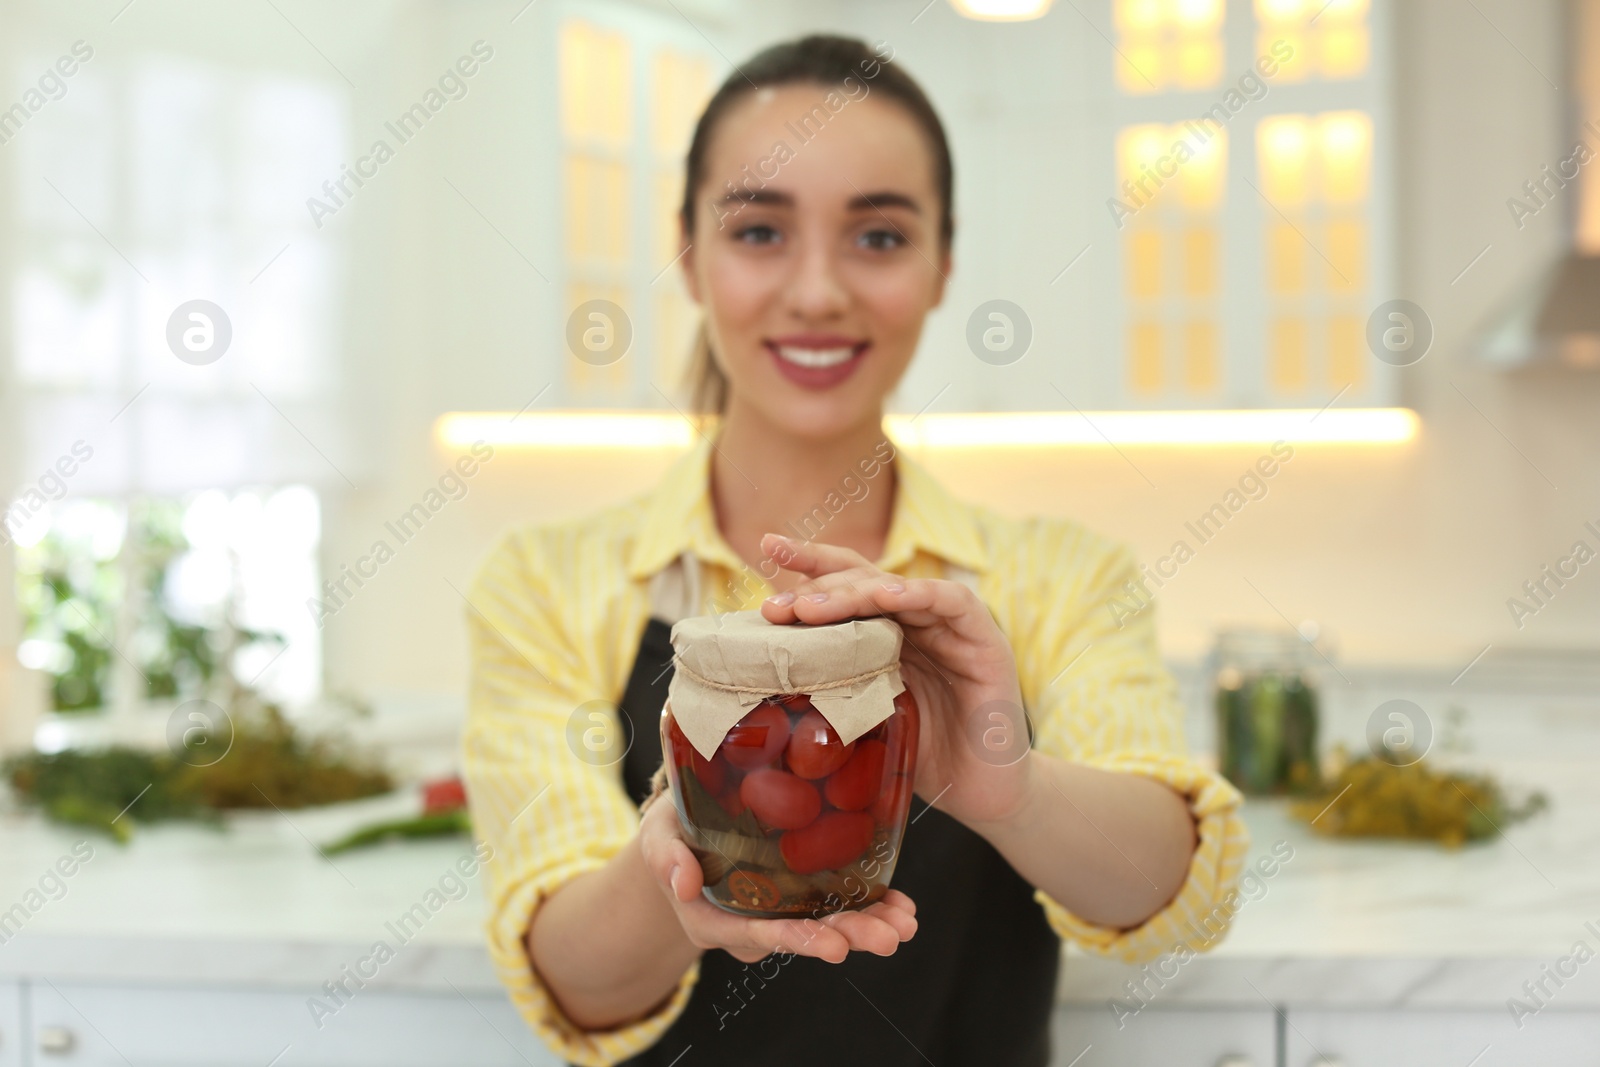 Photo of Woman holding jar of pickled vegetables in kitchen, focus on hands